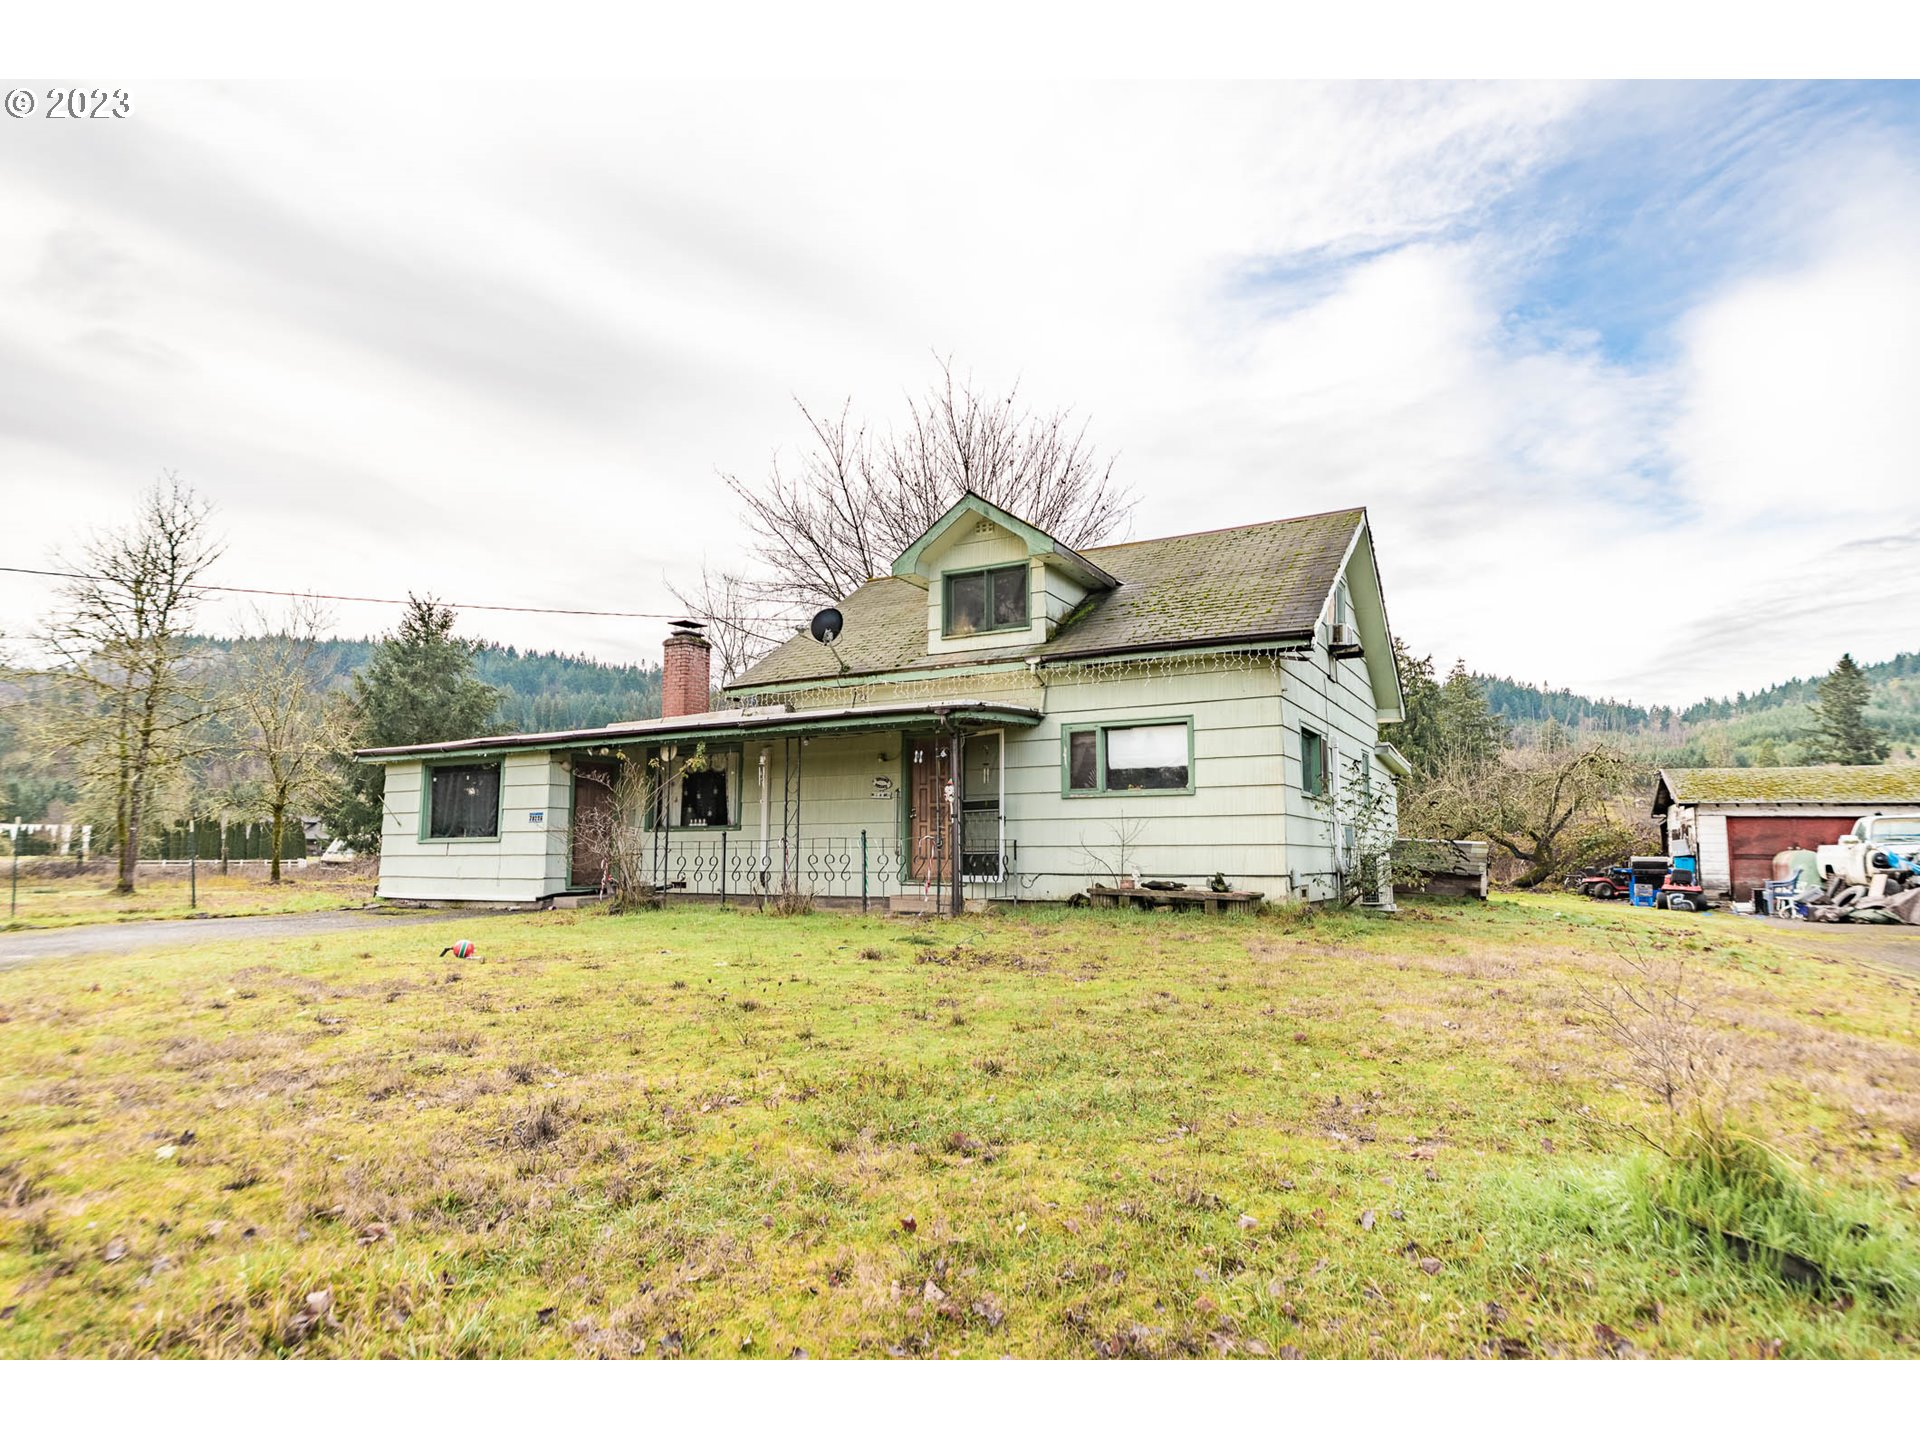 78226 MOSBY CREEK RD, Cottage Grove, OR 97424